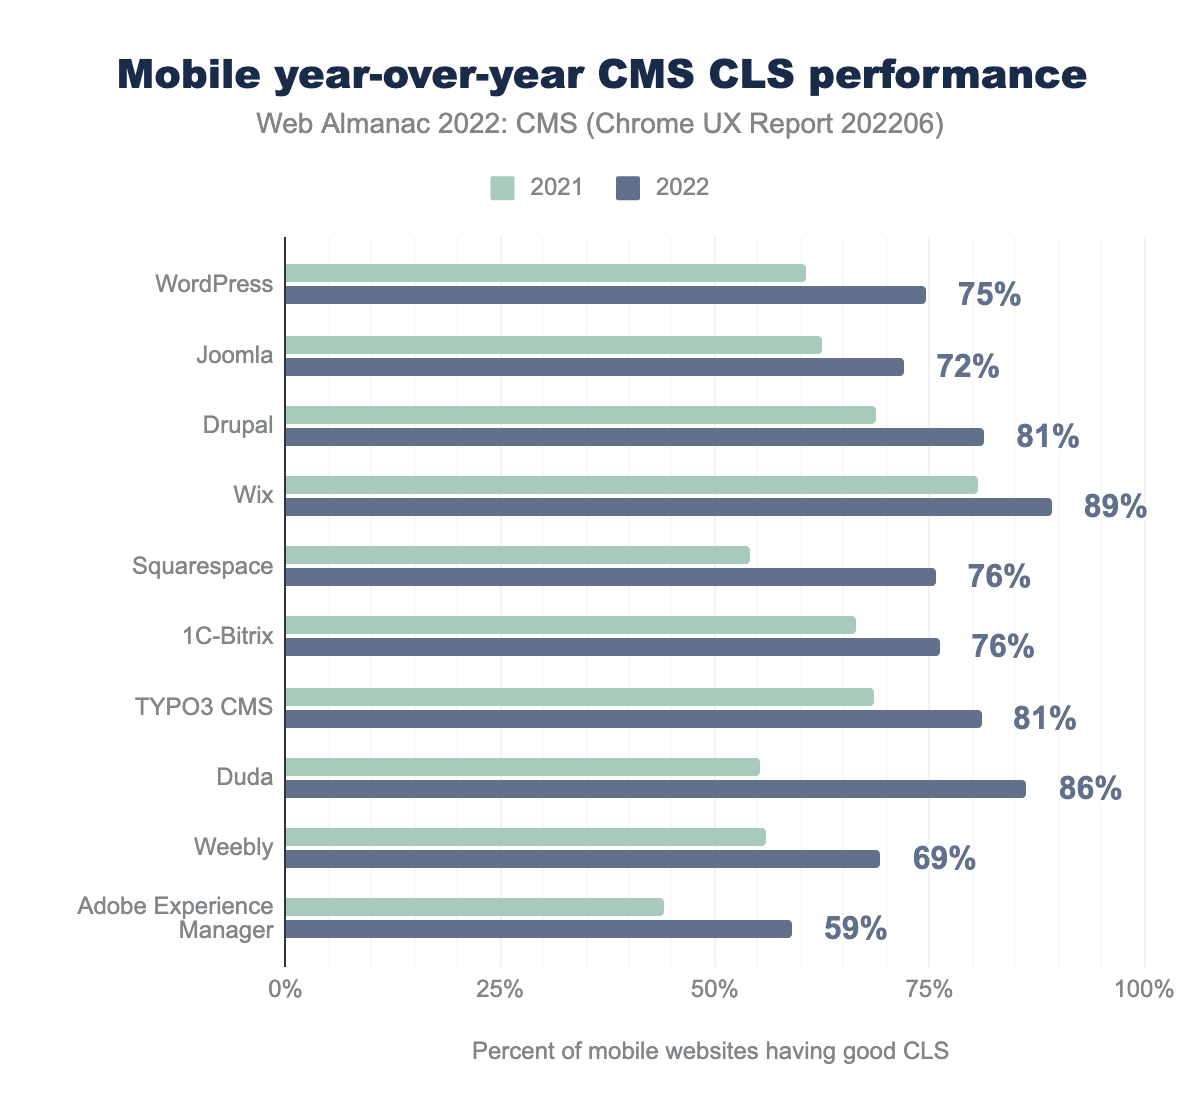 CLS mobile year-over-year.